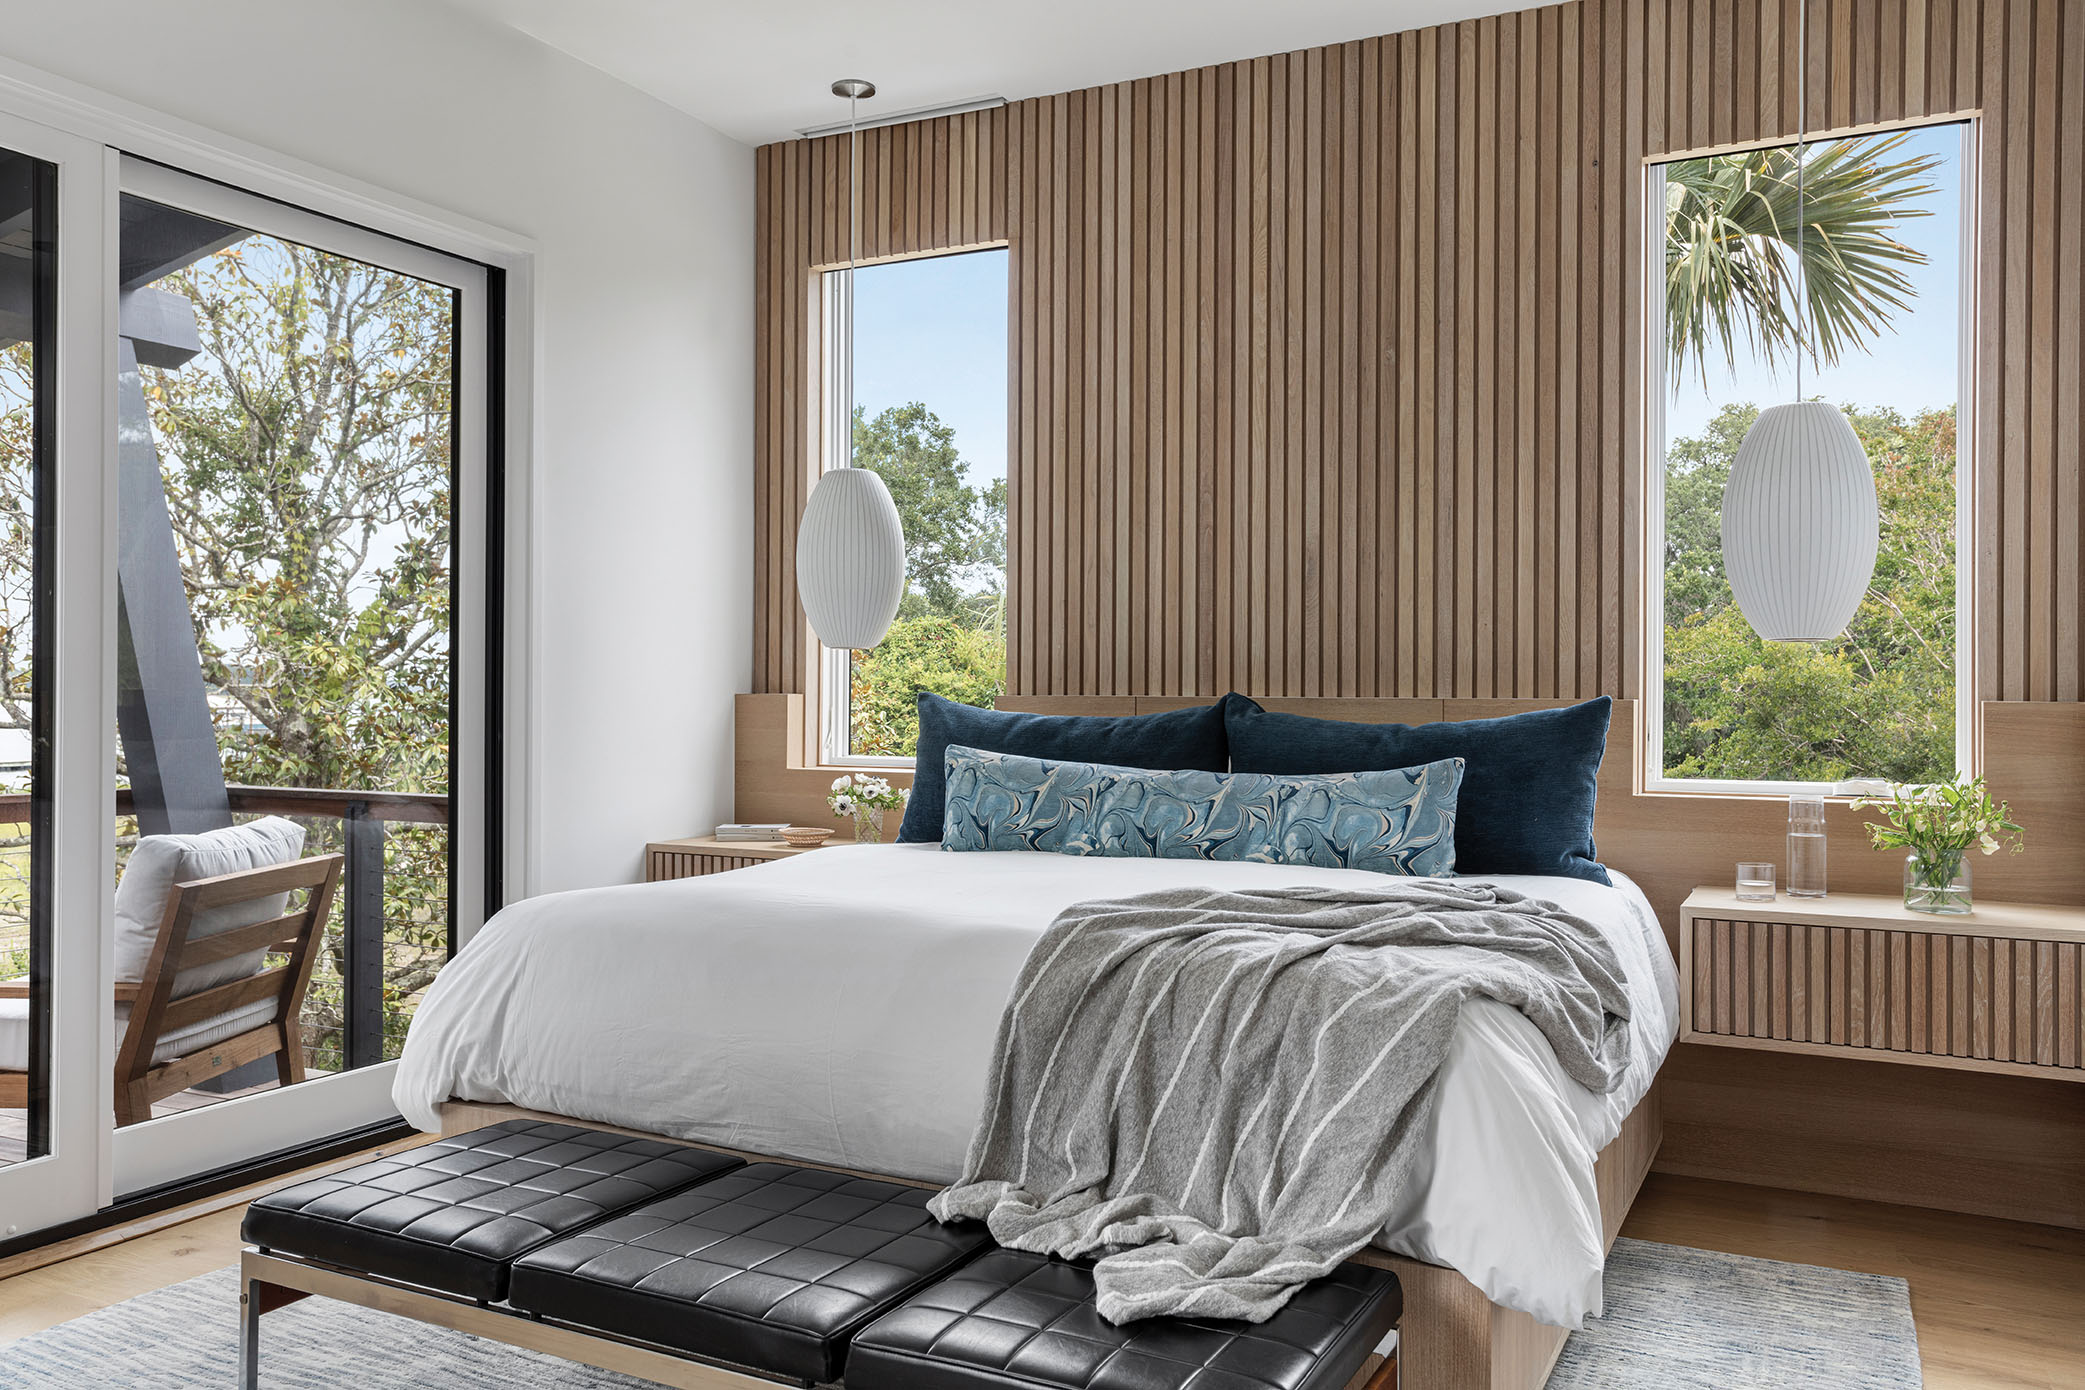 The headboard and side tables are integrated with the walls and windows, adding function and form. Two Nelson “Cigar Bubble” pendant lights and a vintage leather bench bring a touch of style to the simplicity.